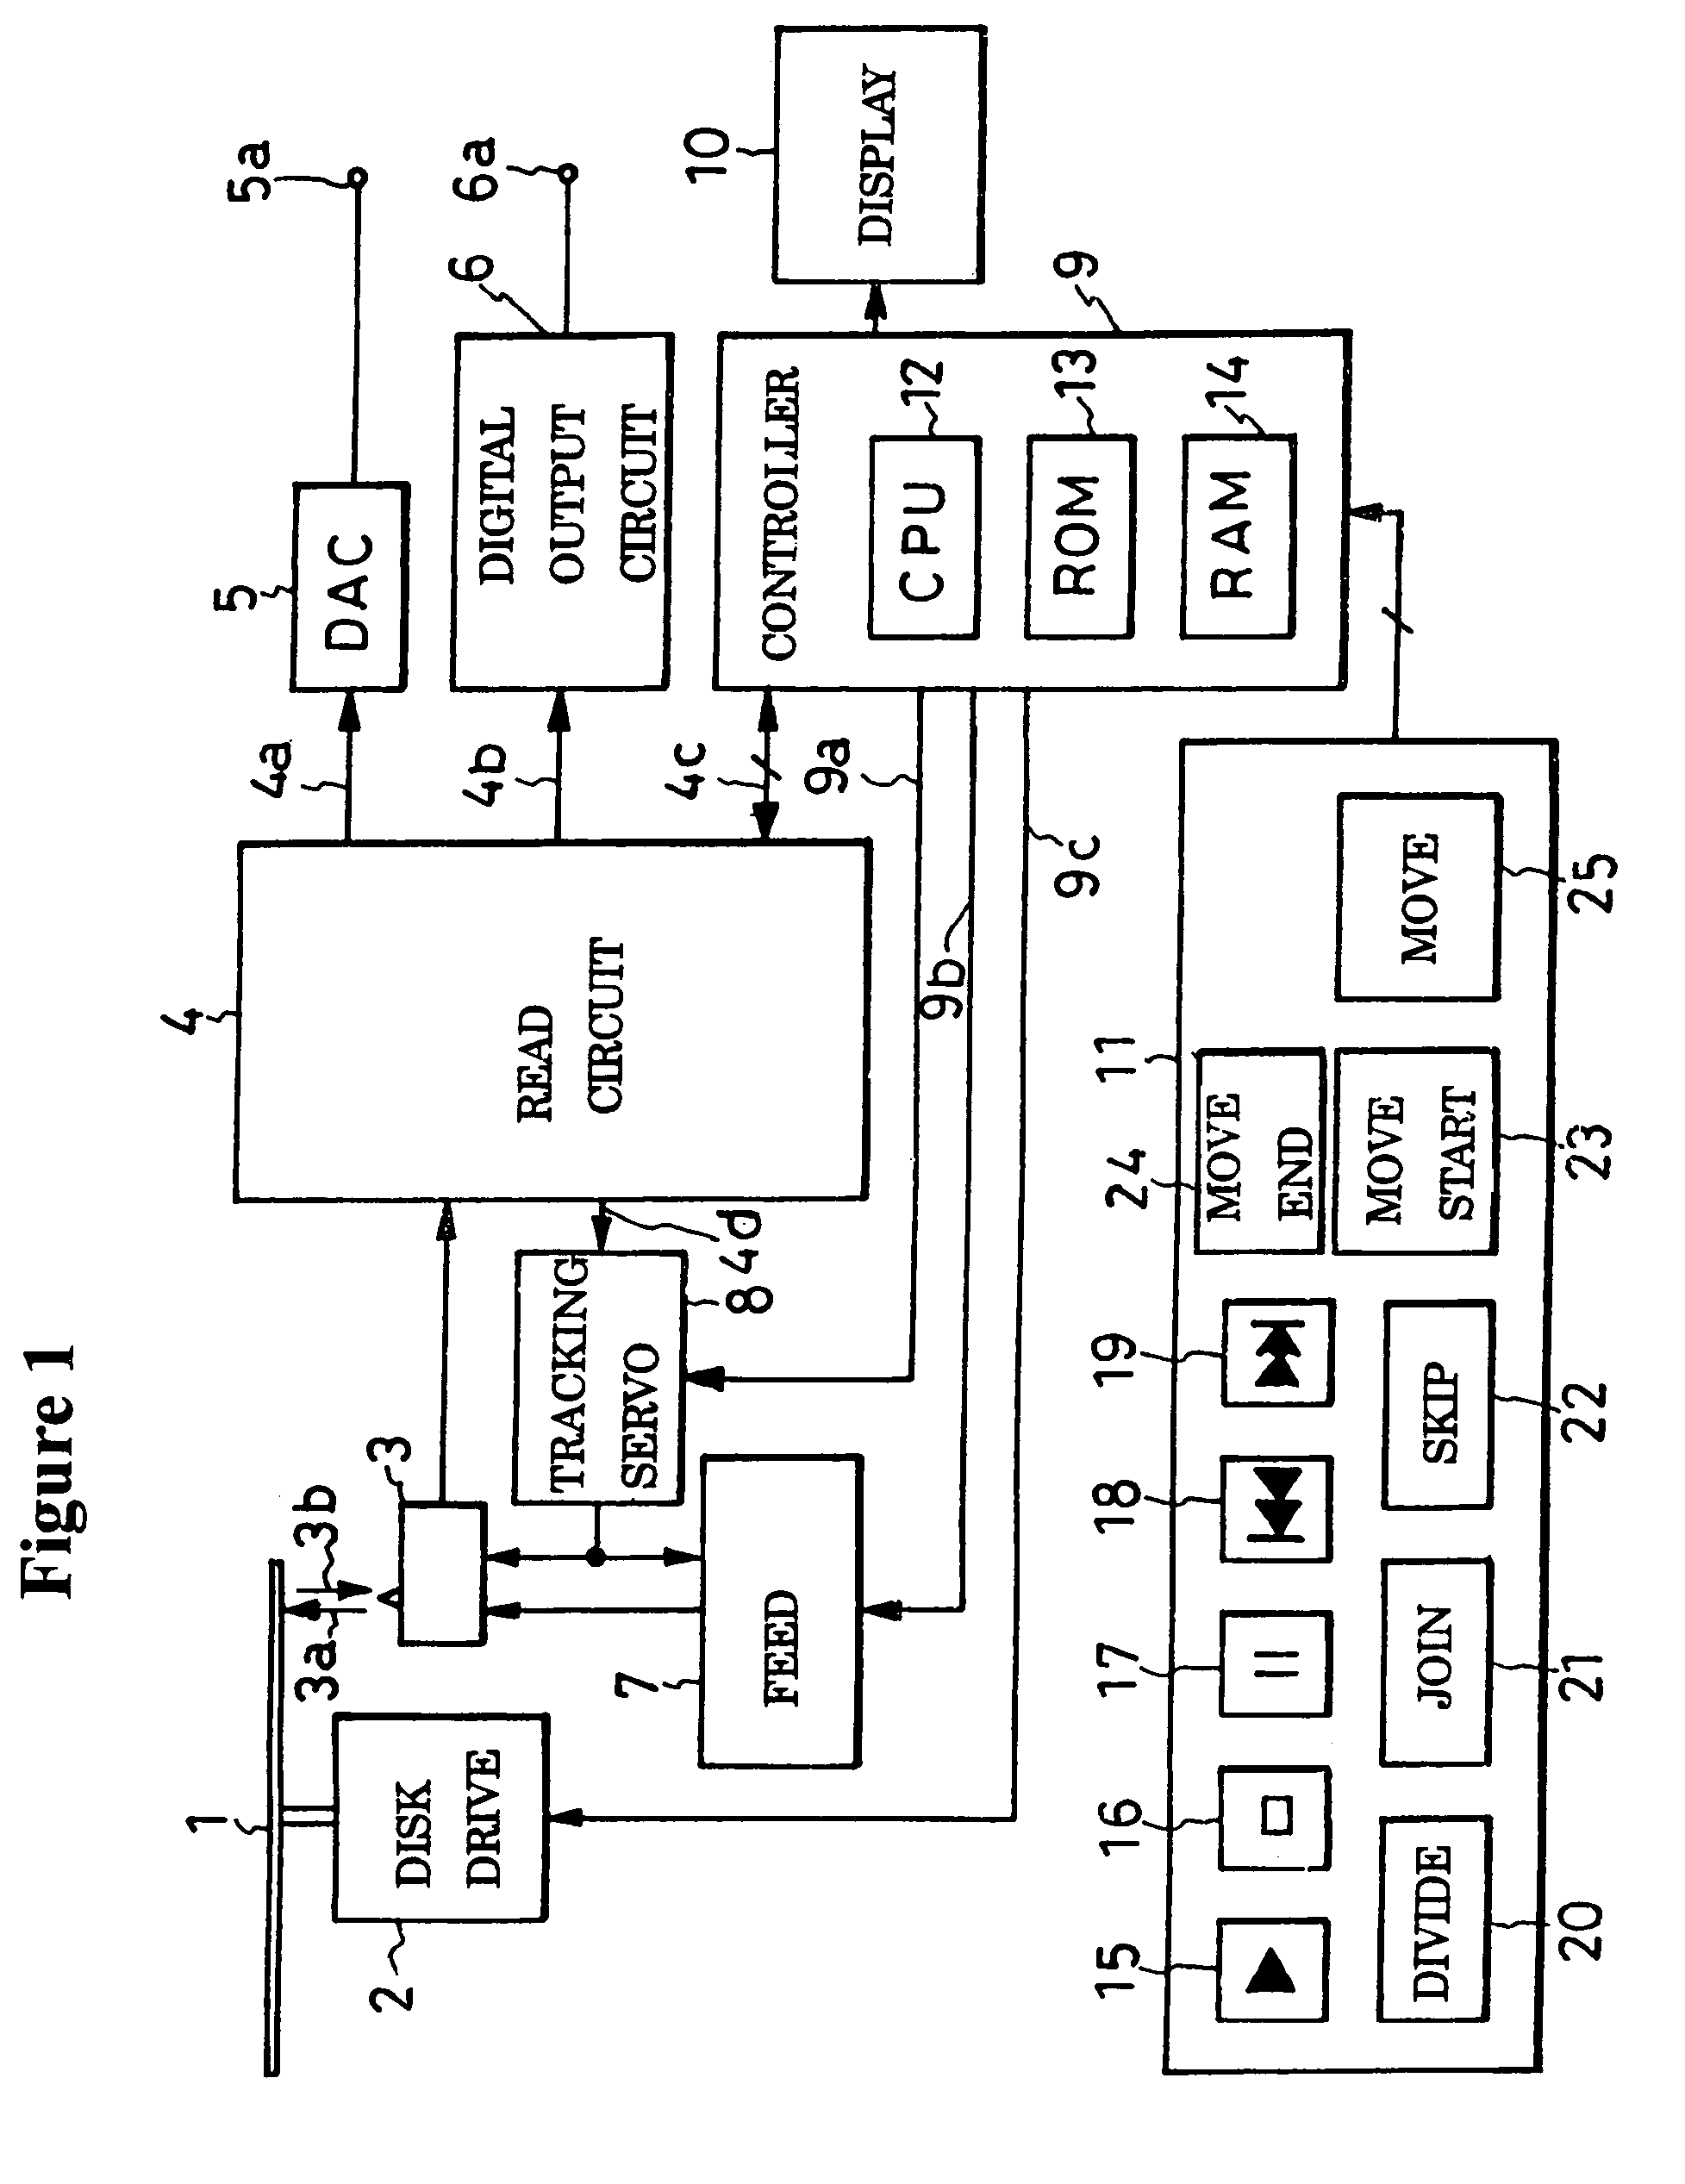 Apparatus for playback of data storage disks